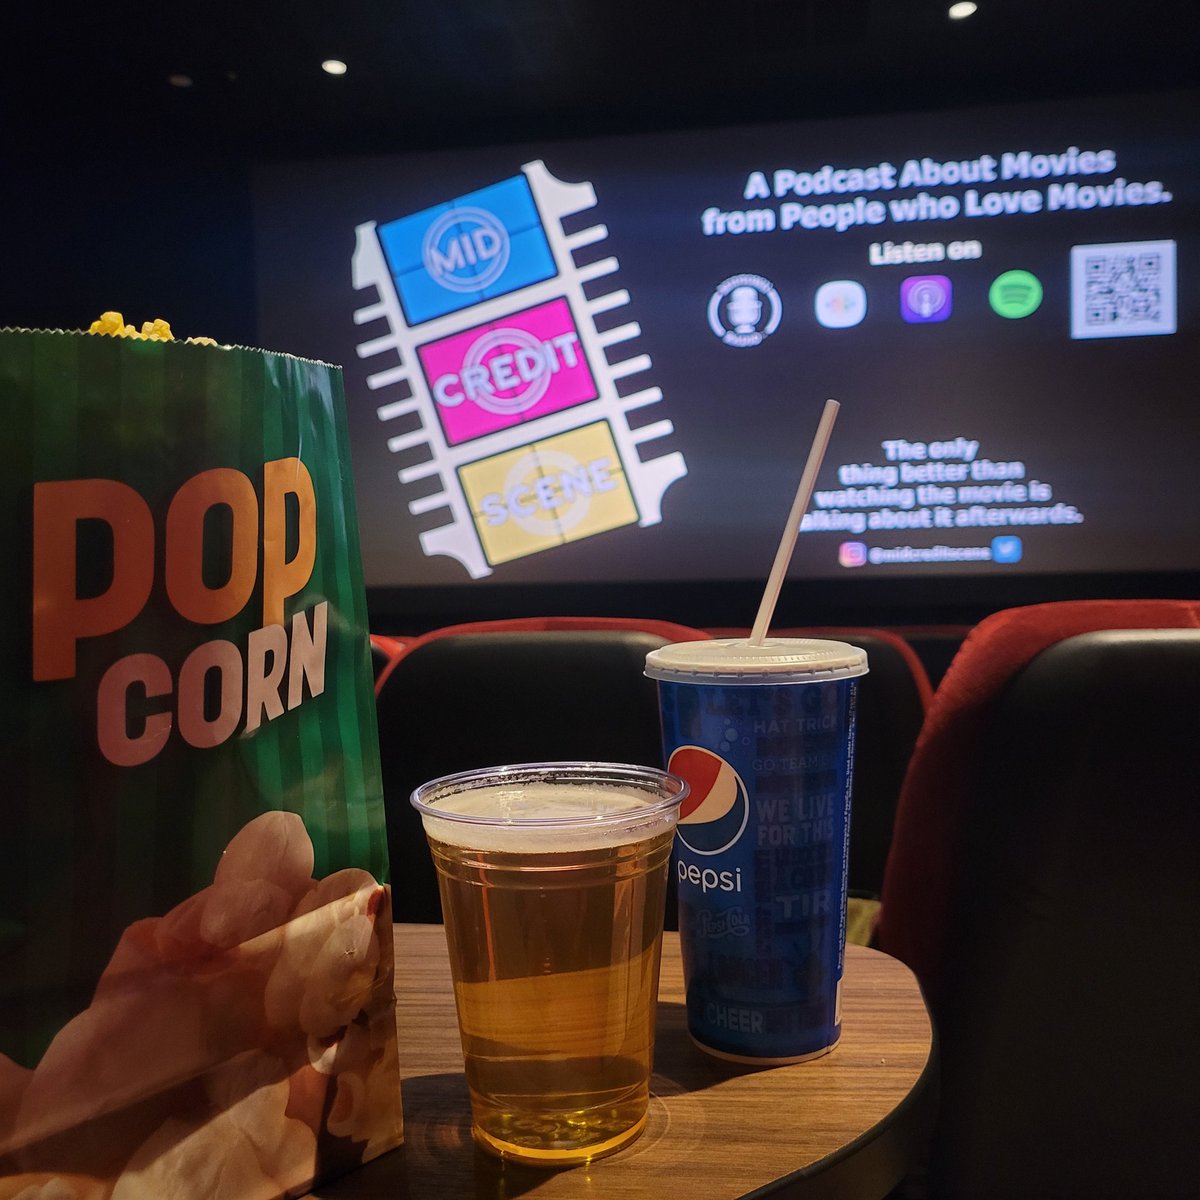 Cozied up in the @theApolloCinema for #Studio666Movie . Eyes filled with tears from fear, laughter, and sadness. #lovediesyoung @foofighters @midcreditscene #LSharp 1,3,5,7.